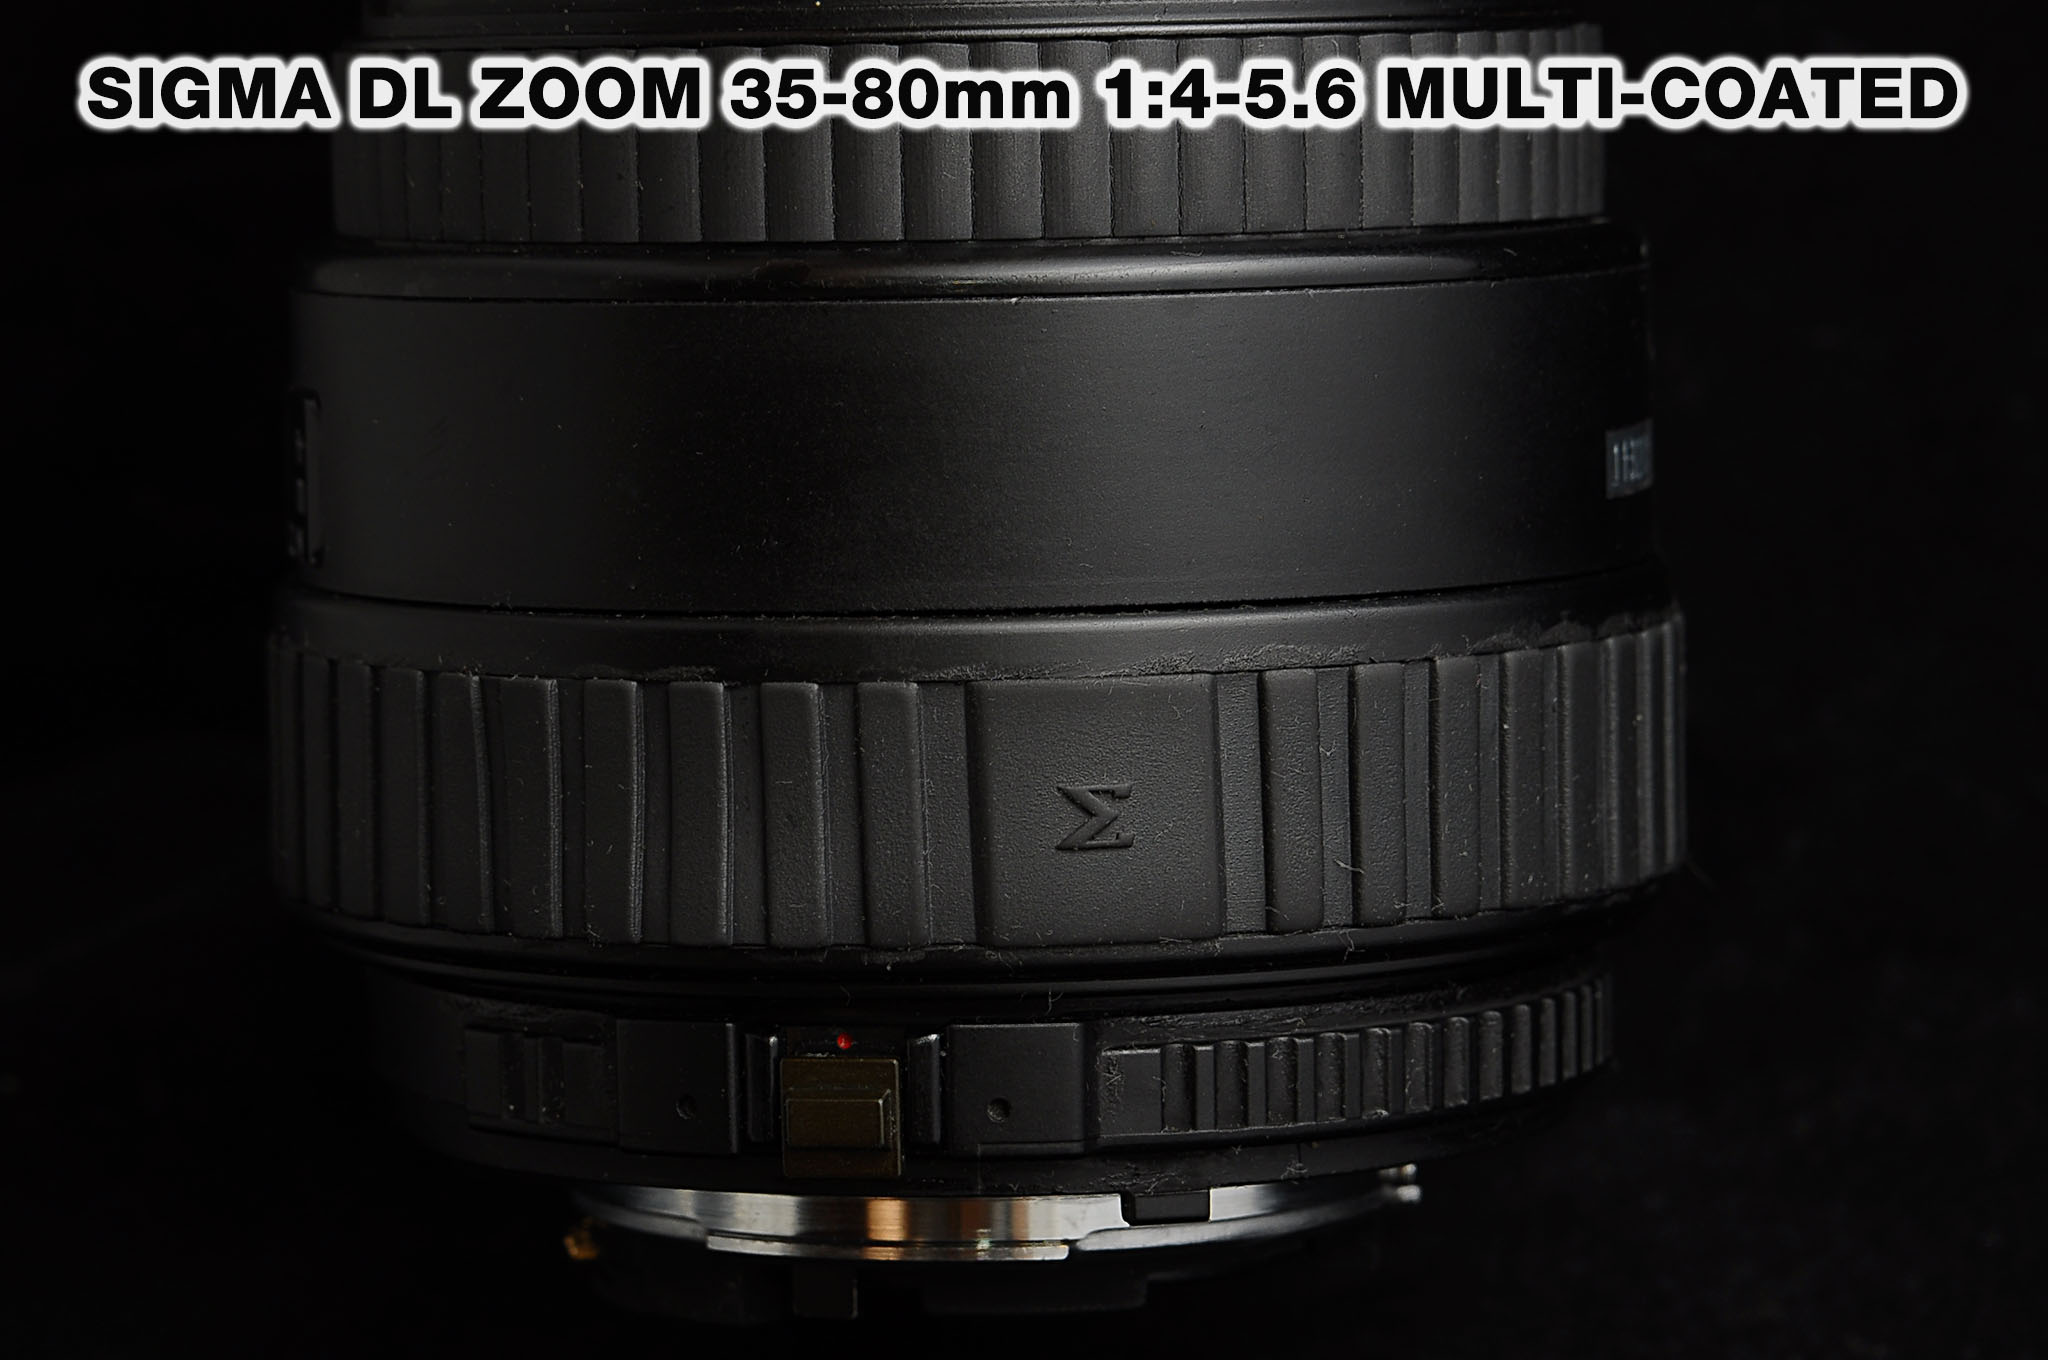 SIGMA DL ZOOM 35-80mm 1: 4-5.6 MULTI-COATED